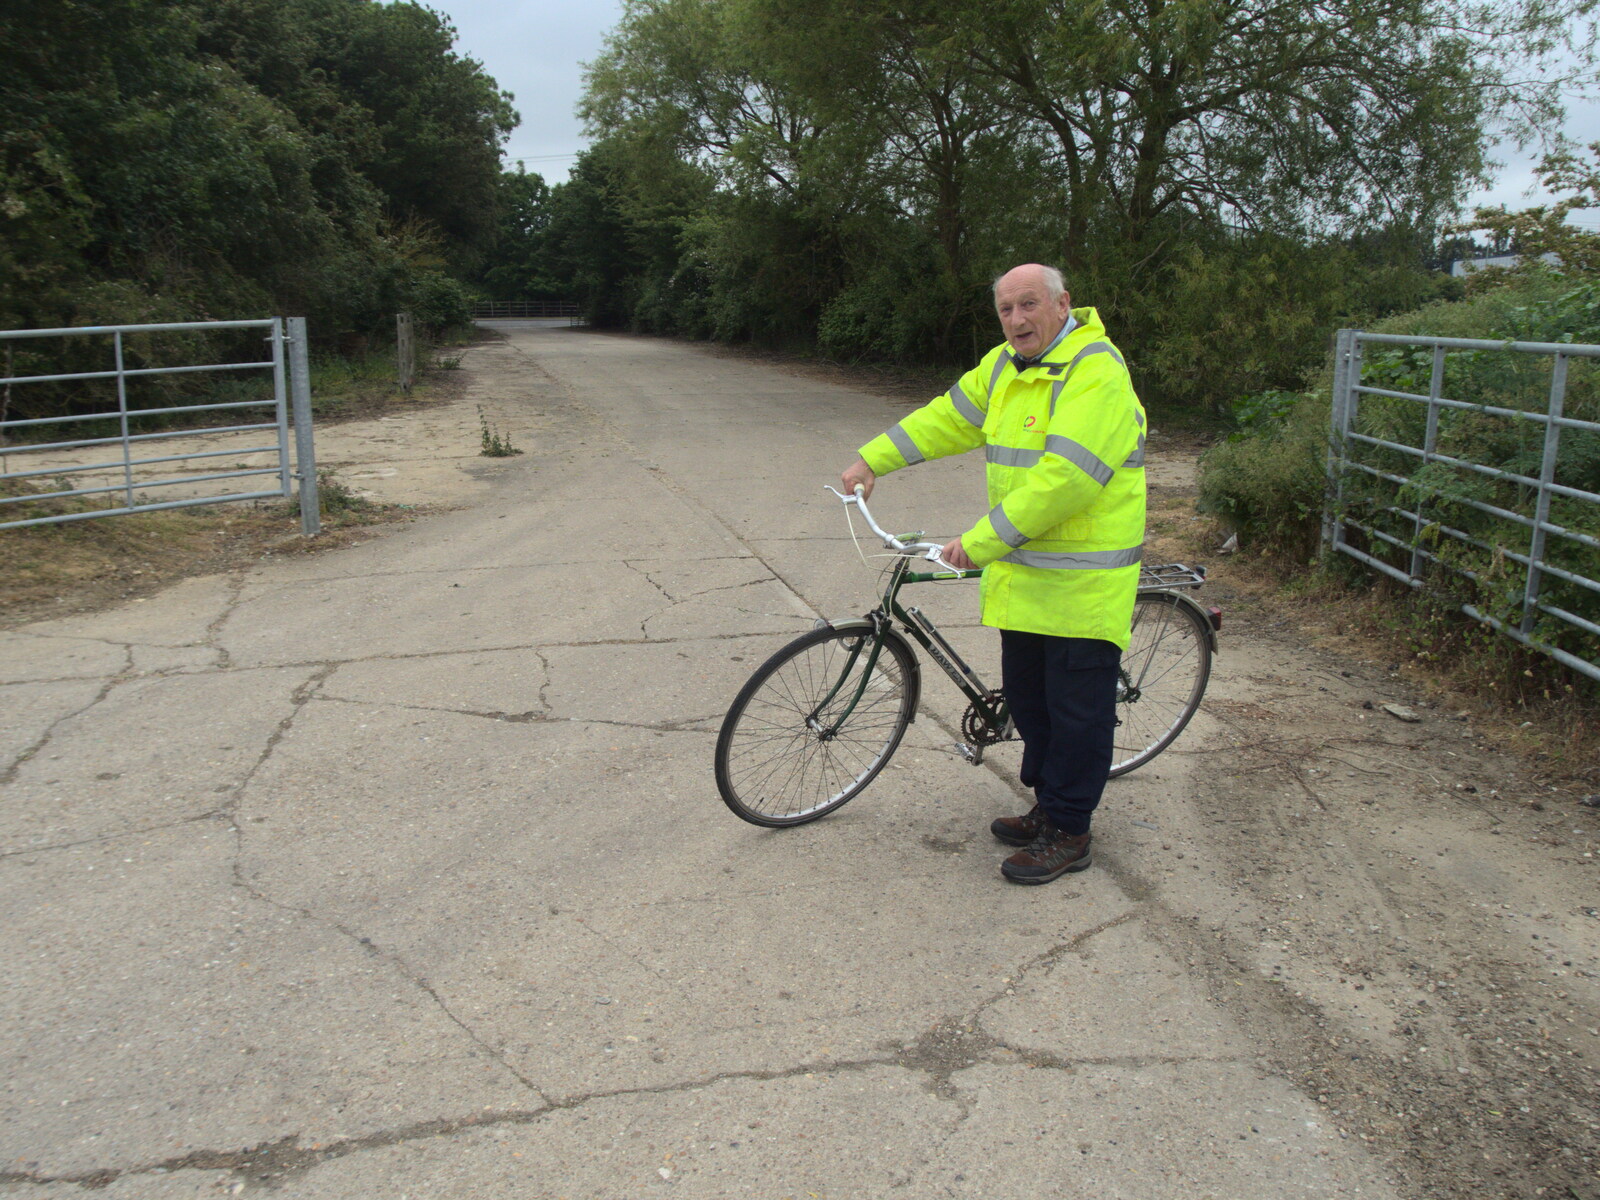 Mick readies his bike for a trip to the Railway from A Quest for the Fabled Swimming Spot, Hoxne, Suffolk - 29th May 2023